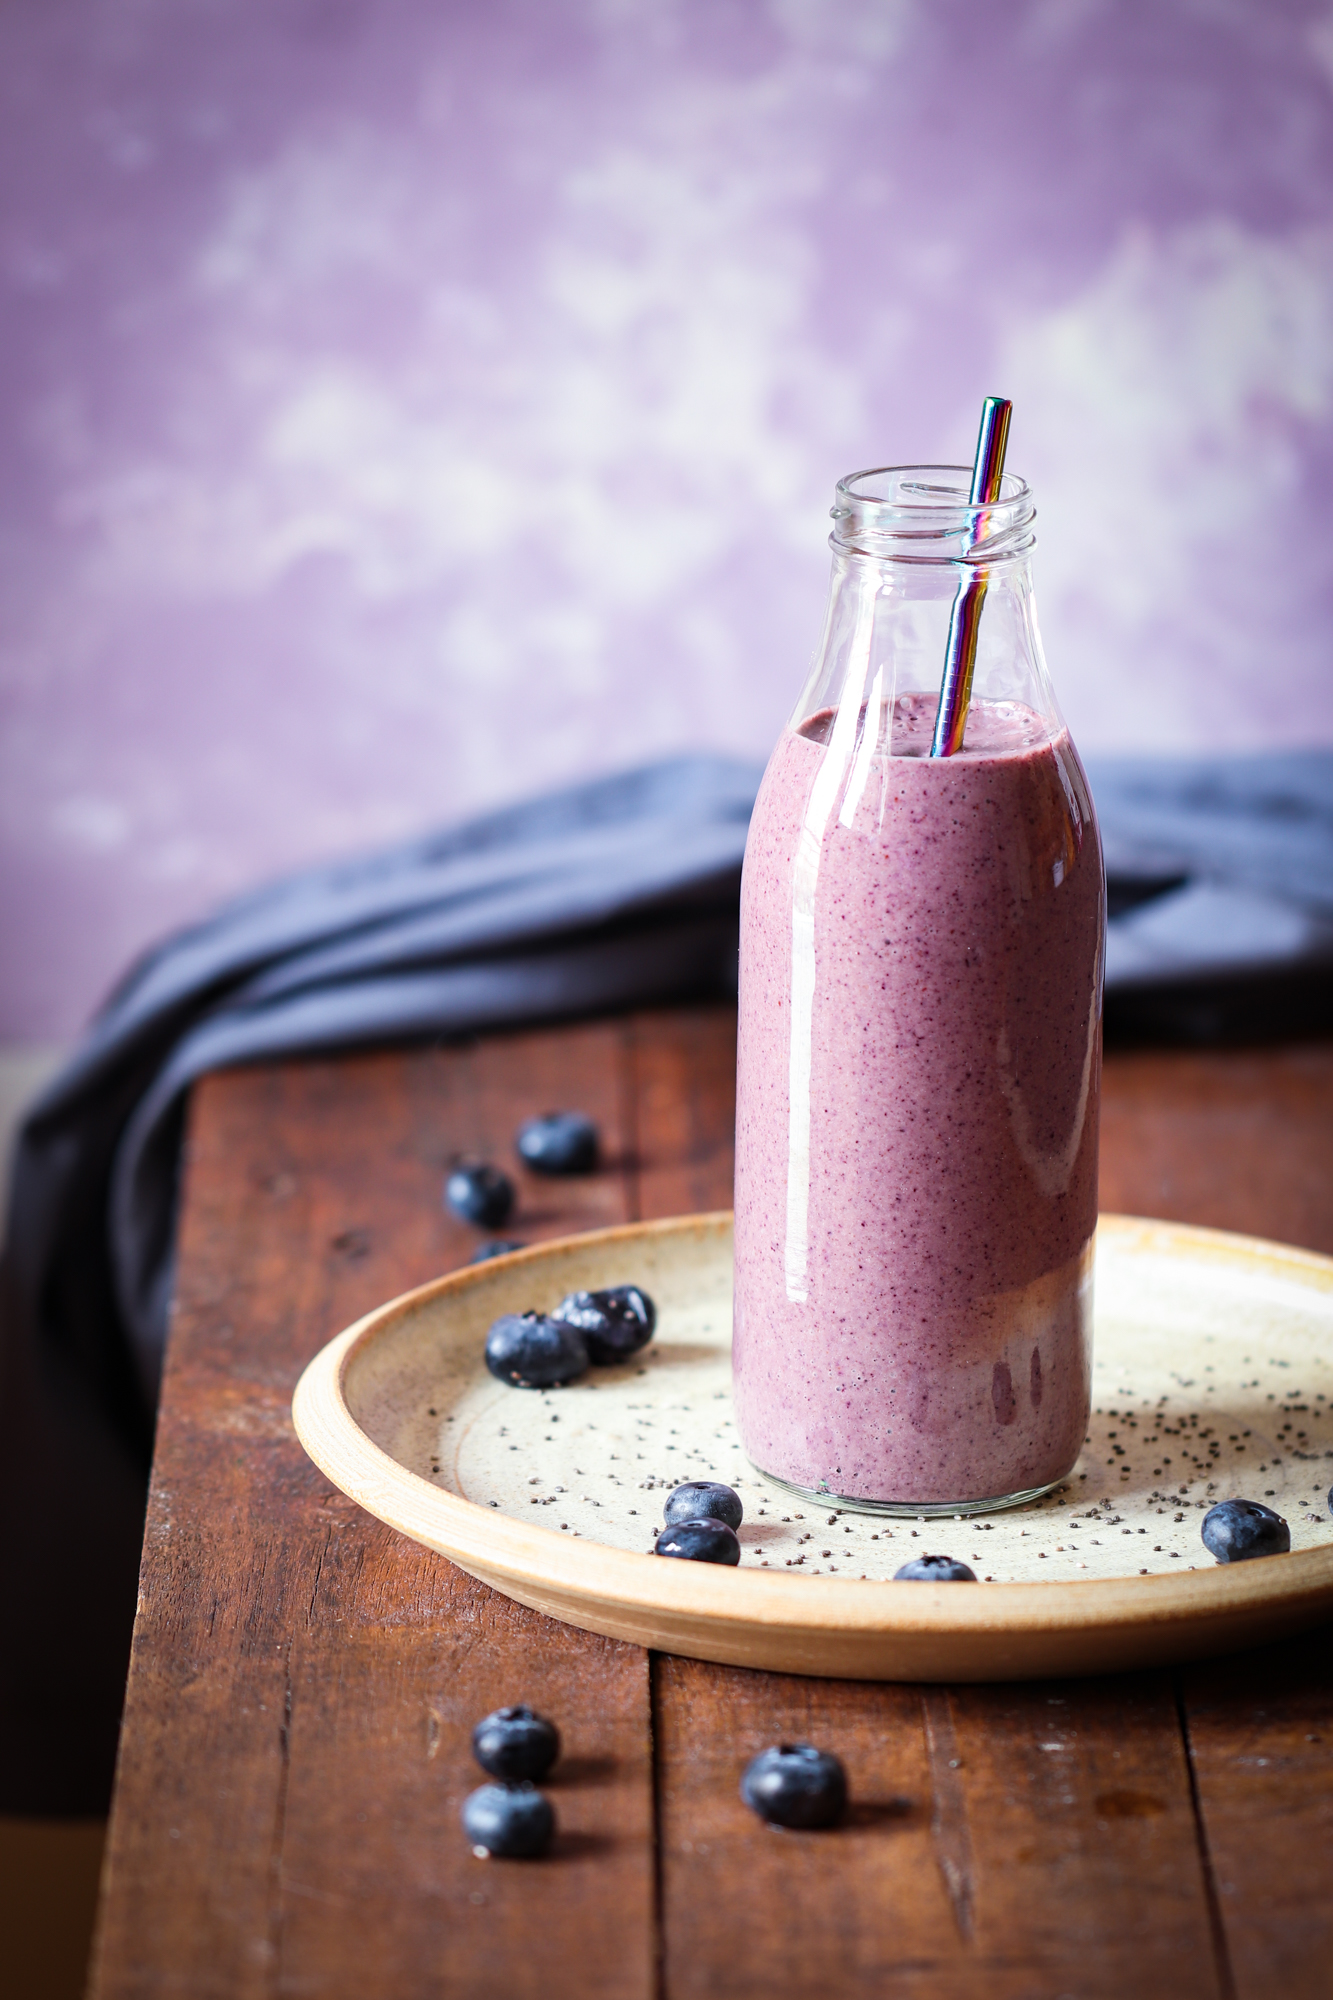 Banana and blueberries smoothie